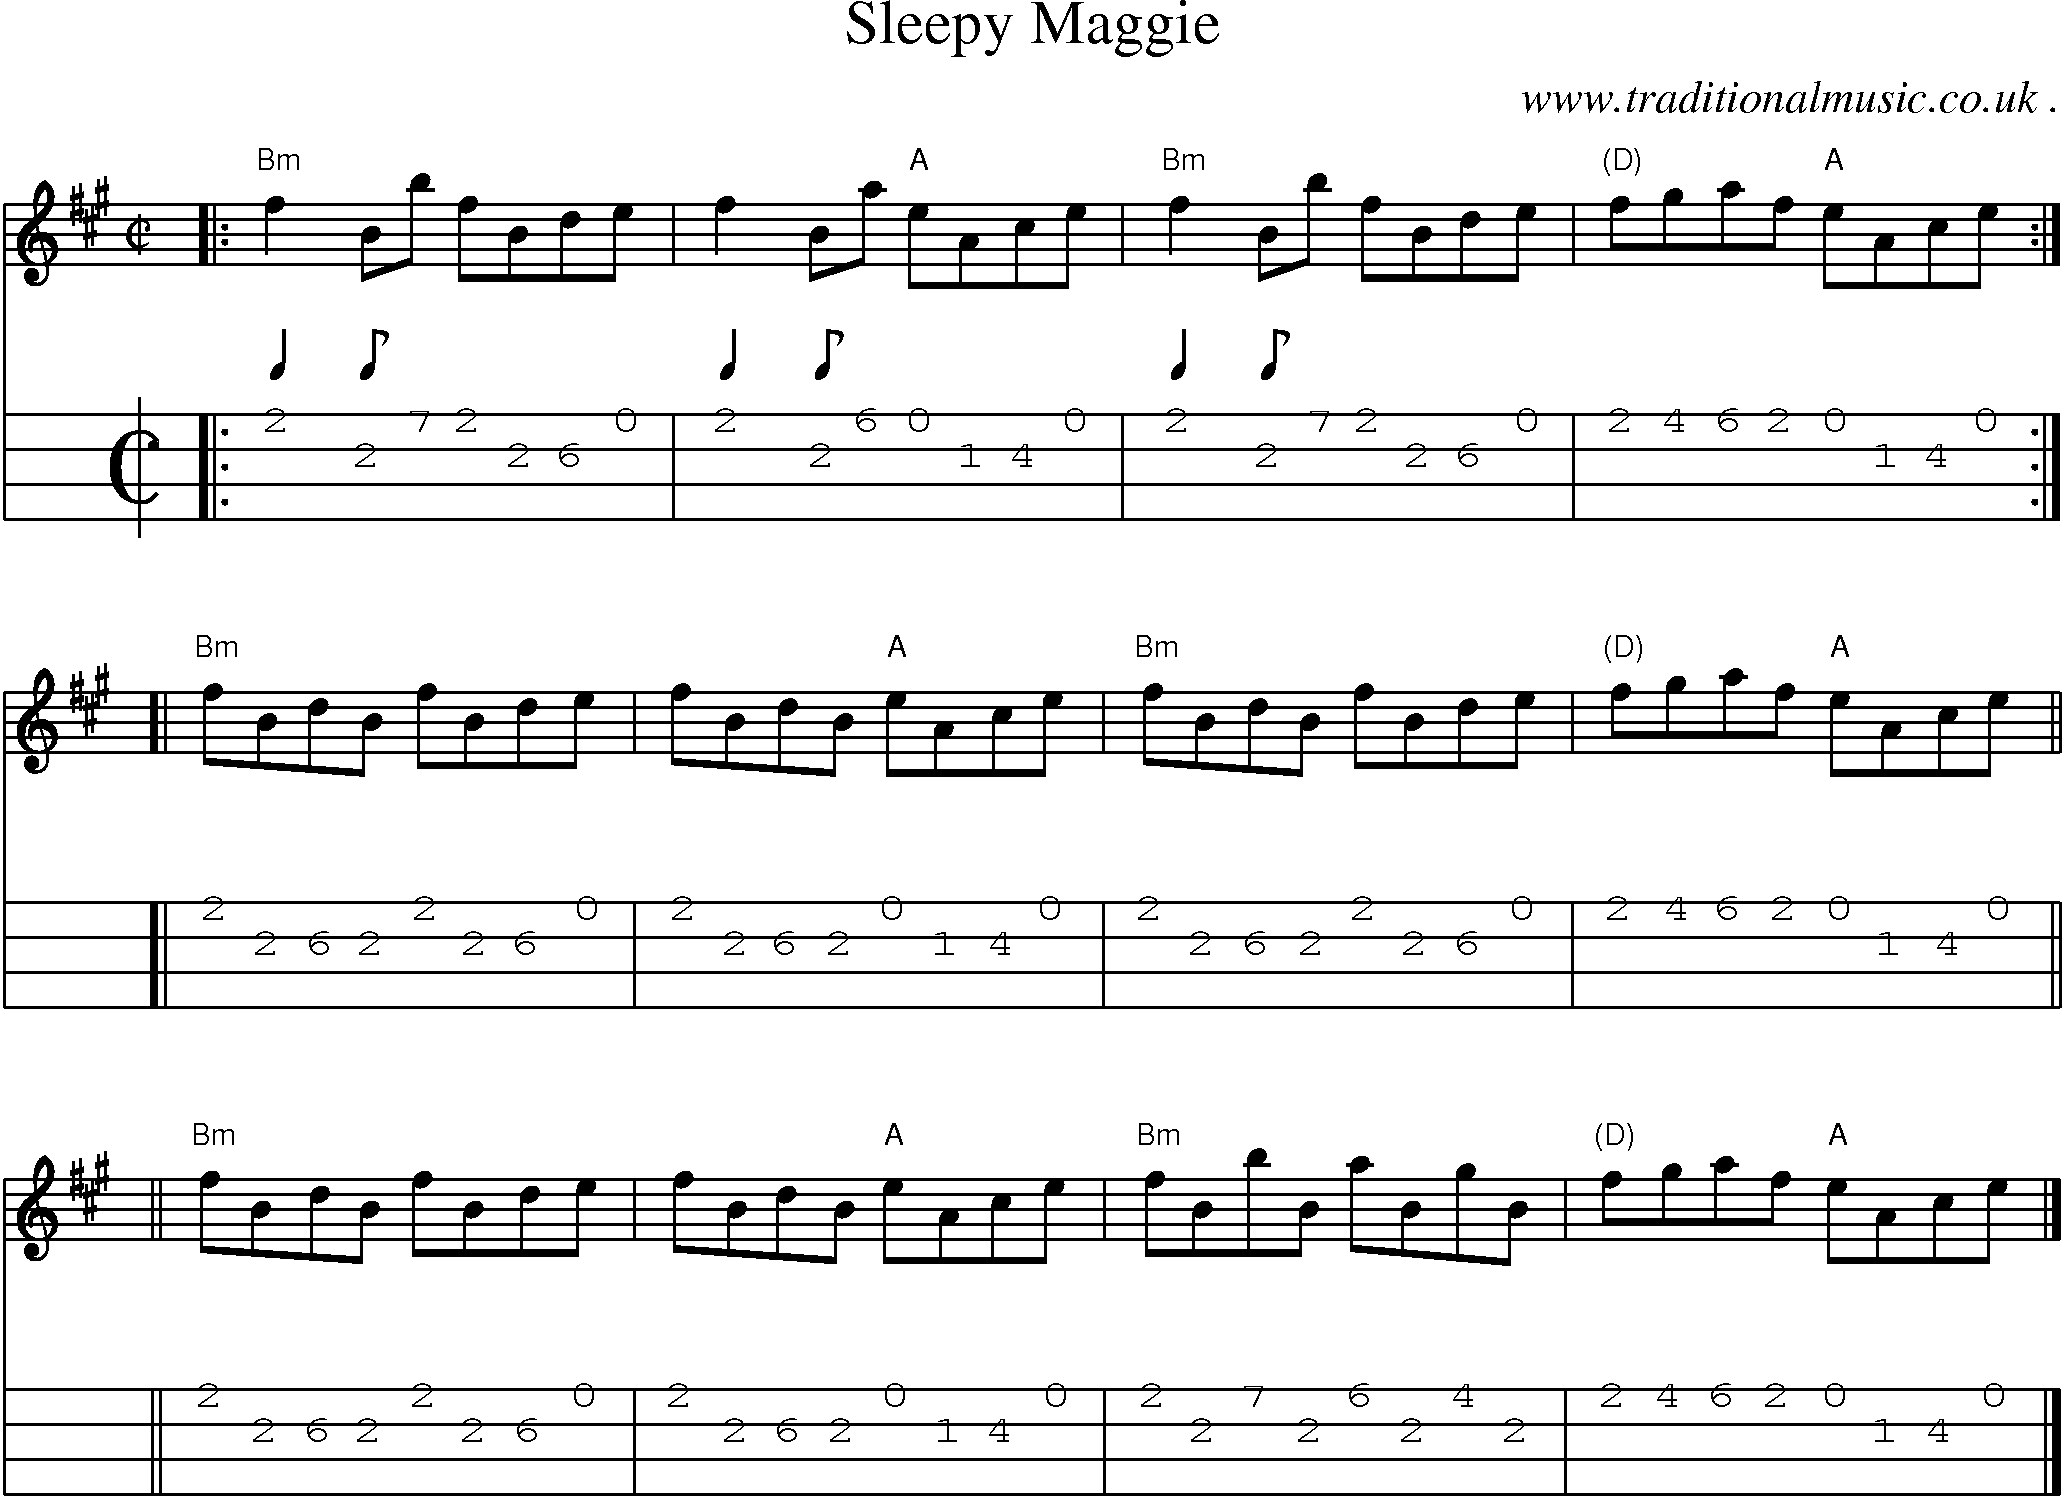 Sheet-music  score, Chords and Mandolin Tabs for Sleepy Maggie